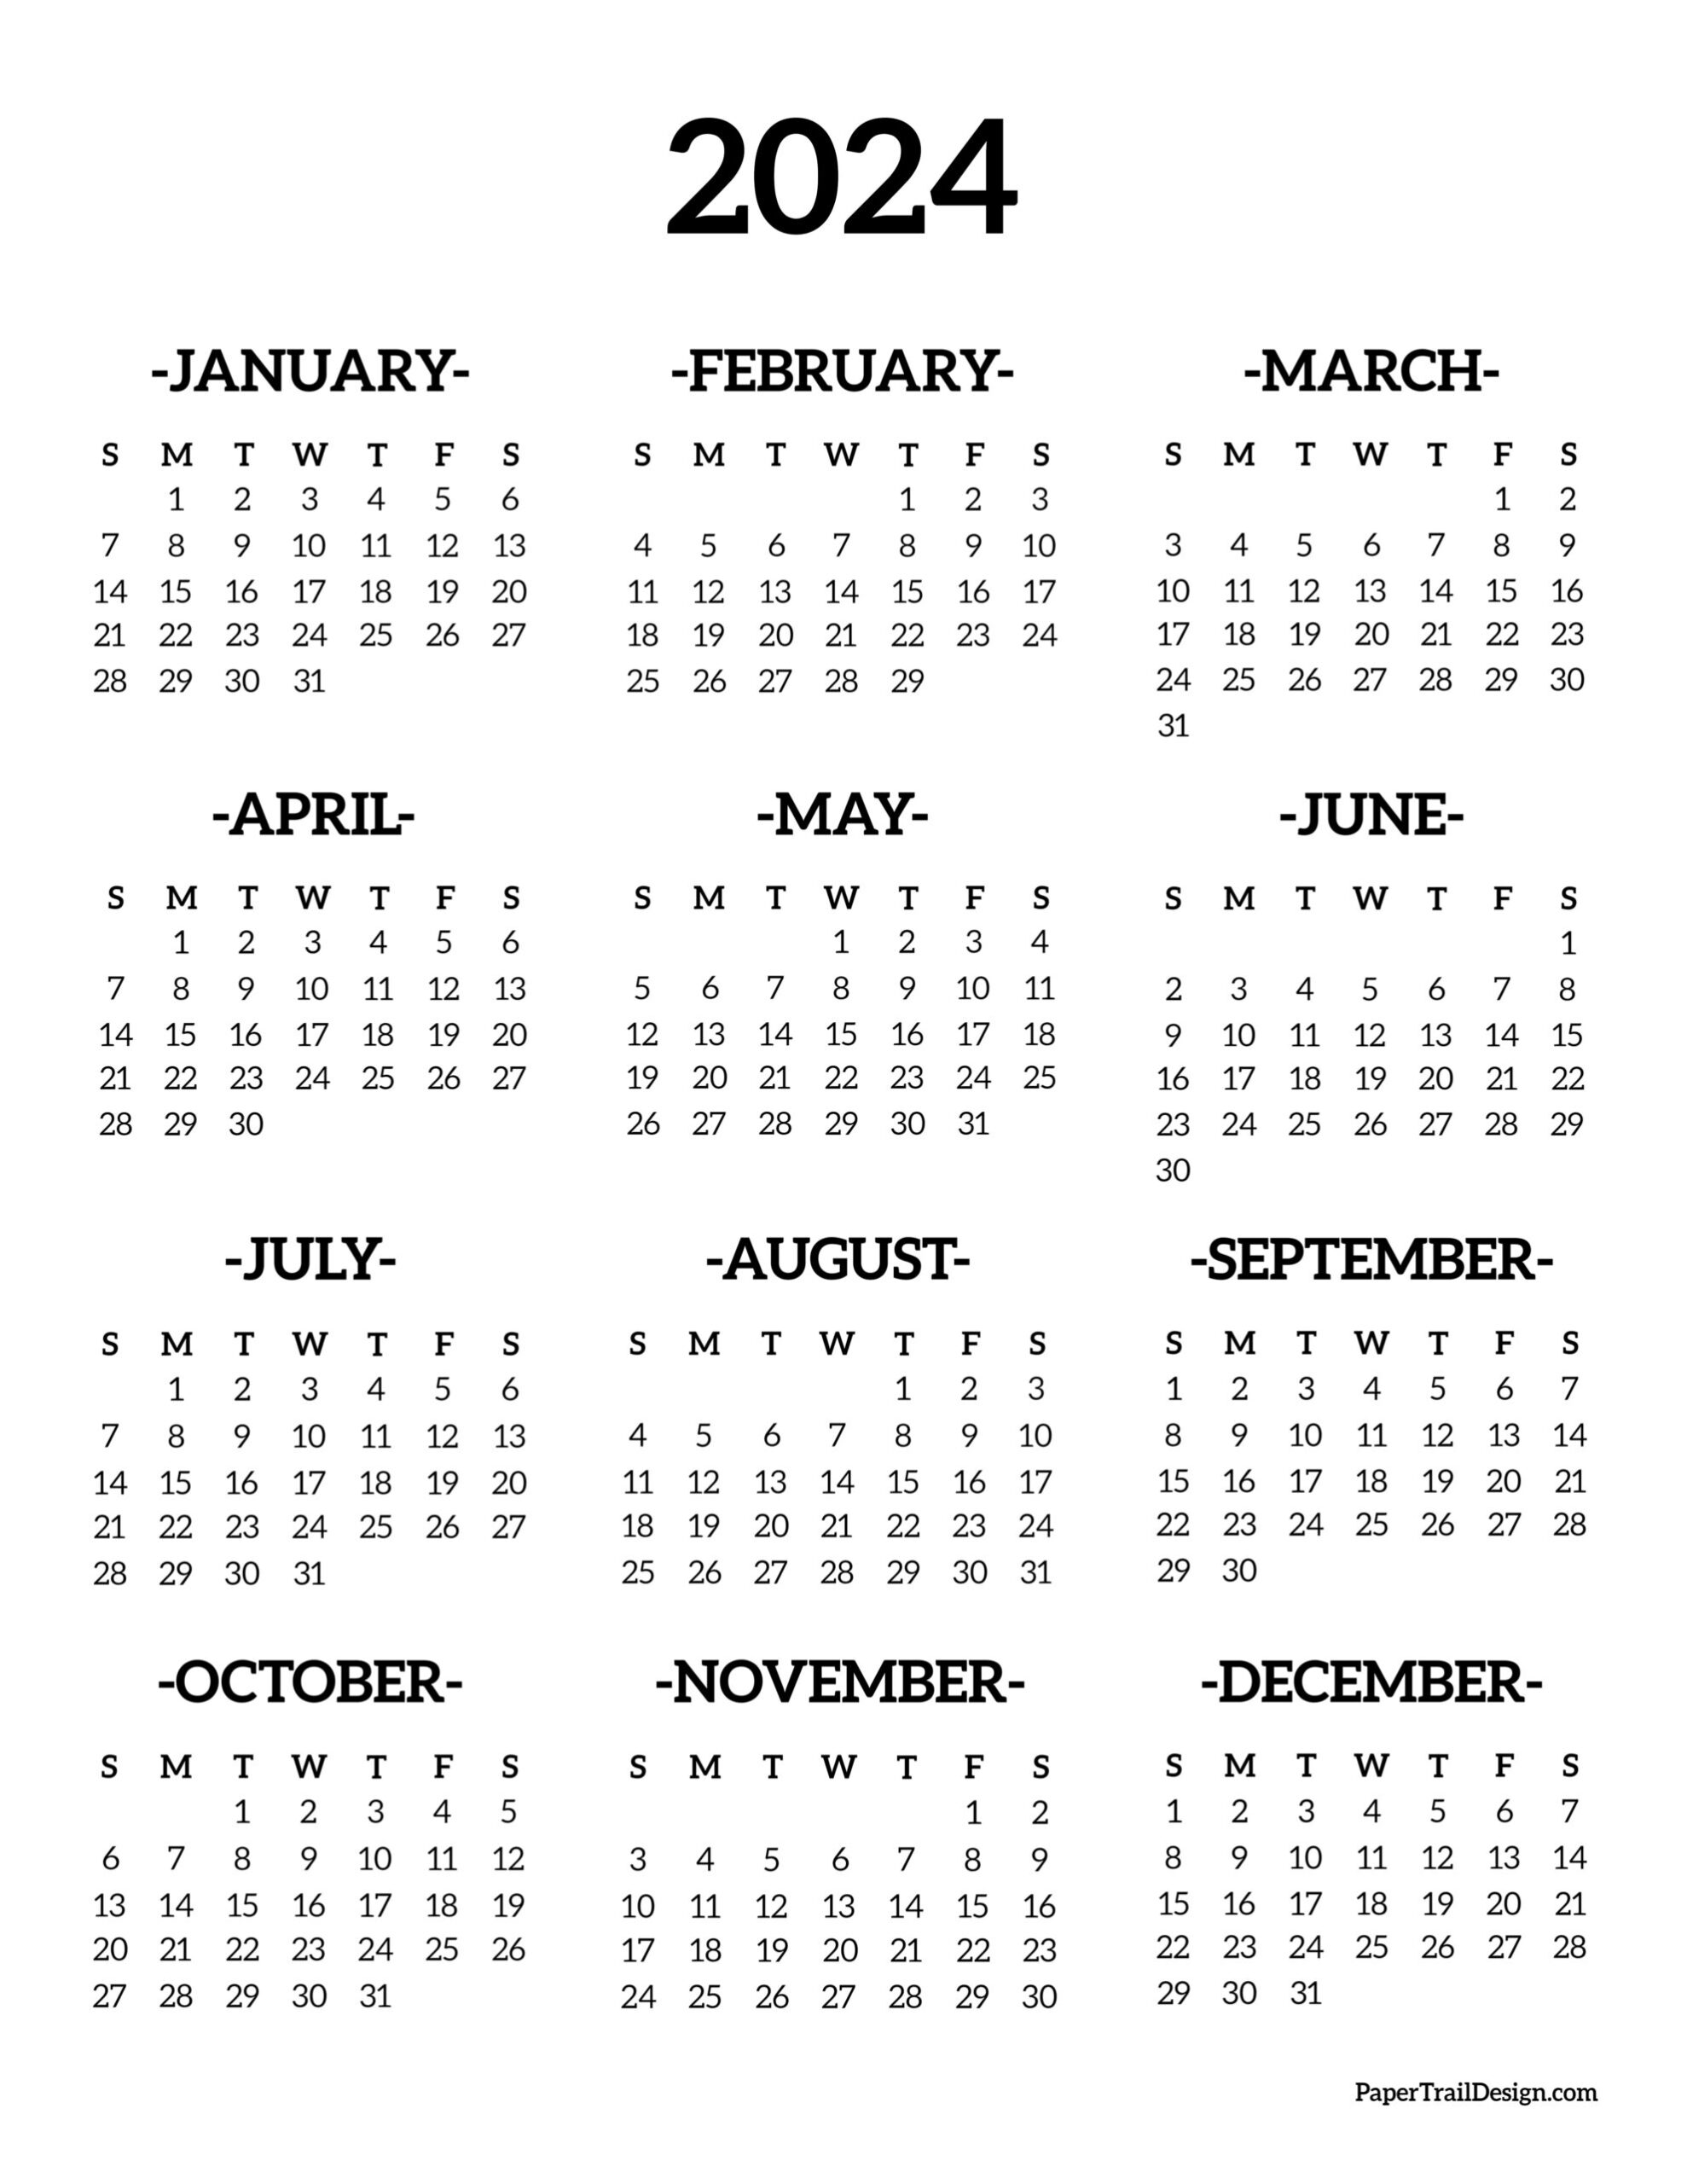 Calendar 2024 Printable One Page - Paper Trail Design for Yearly 2024 Calendar Printable